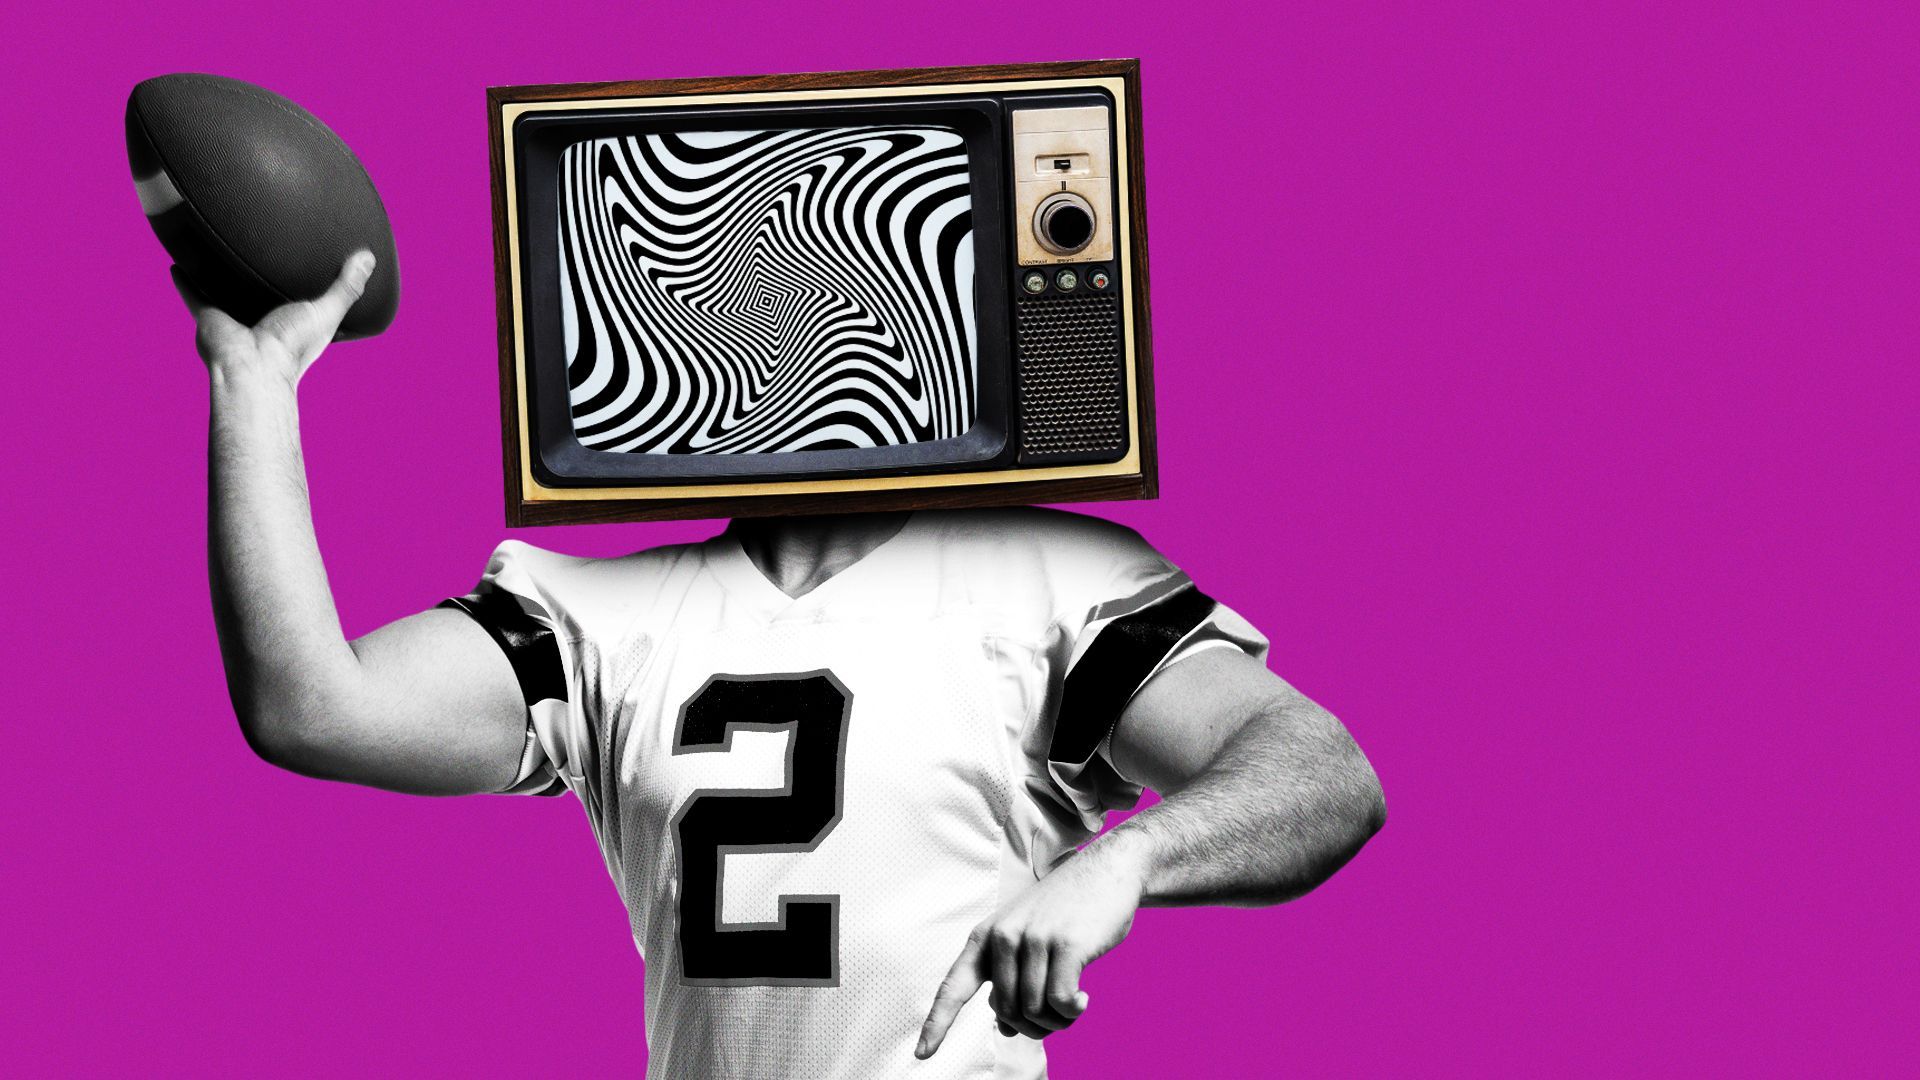 Illustration of a person throwing a football, but their head is a TV with a hypnotic pattern.